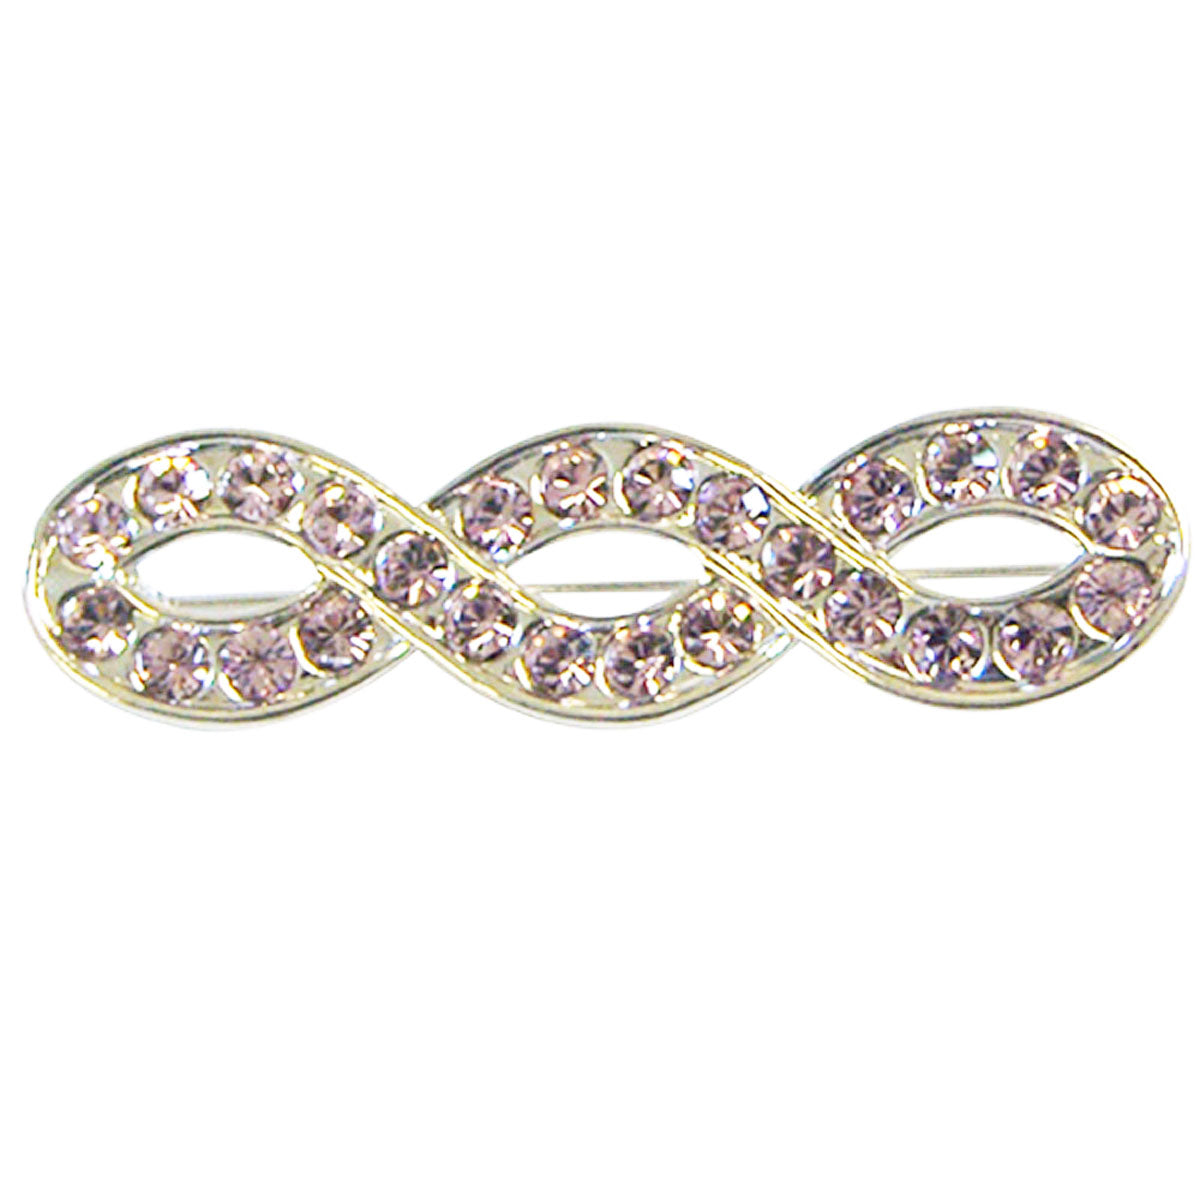 Exselle Infinity Breast Cancer Pink Stones Platinum Plate Stock Pin